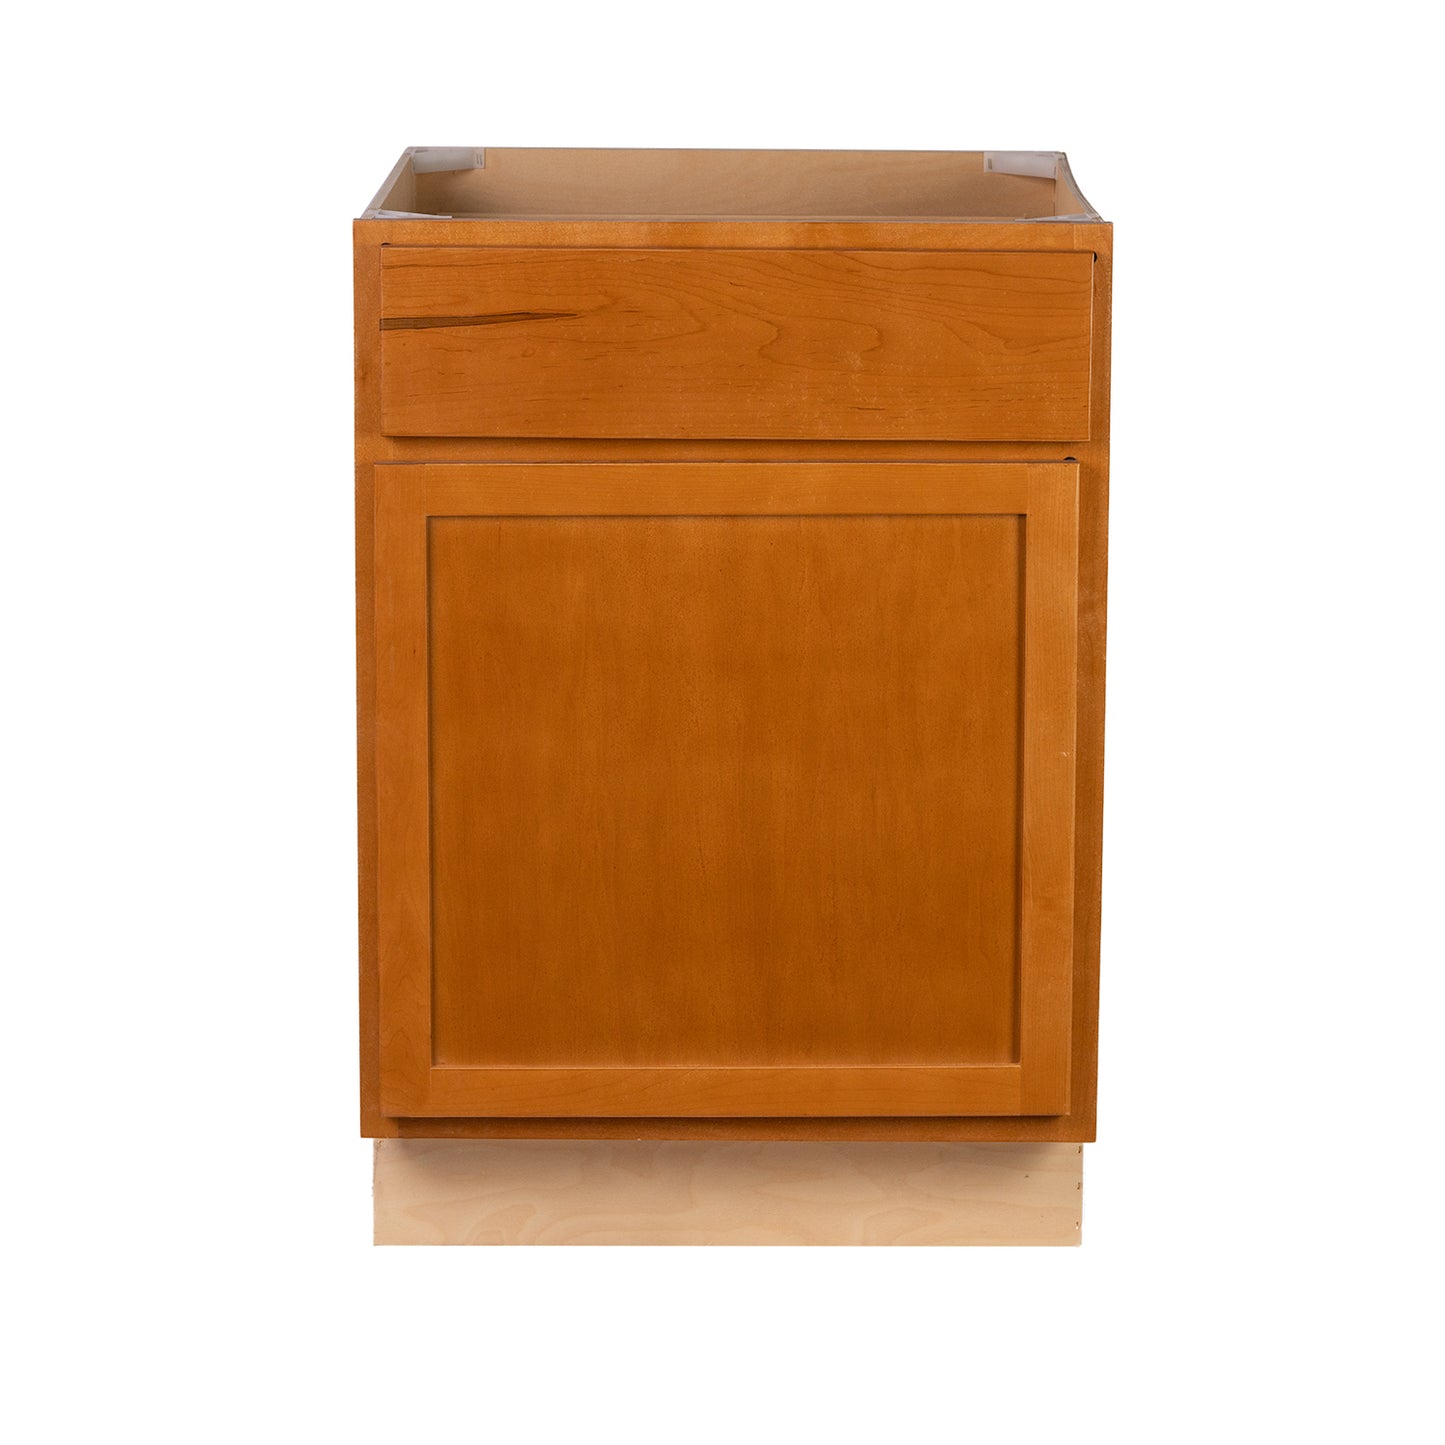 Quicklock RTA (Ready-to-Assemble) Provincial Stain Base Cabinet | 12"Wx34.5"Hx24"D